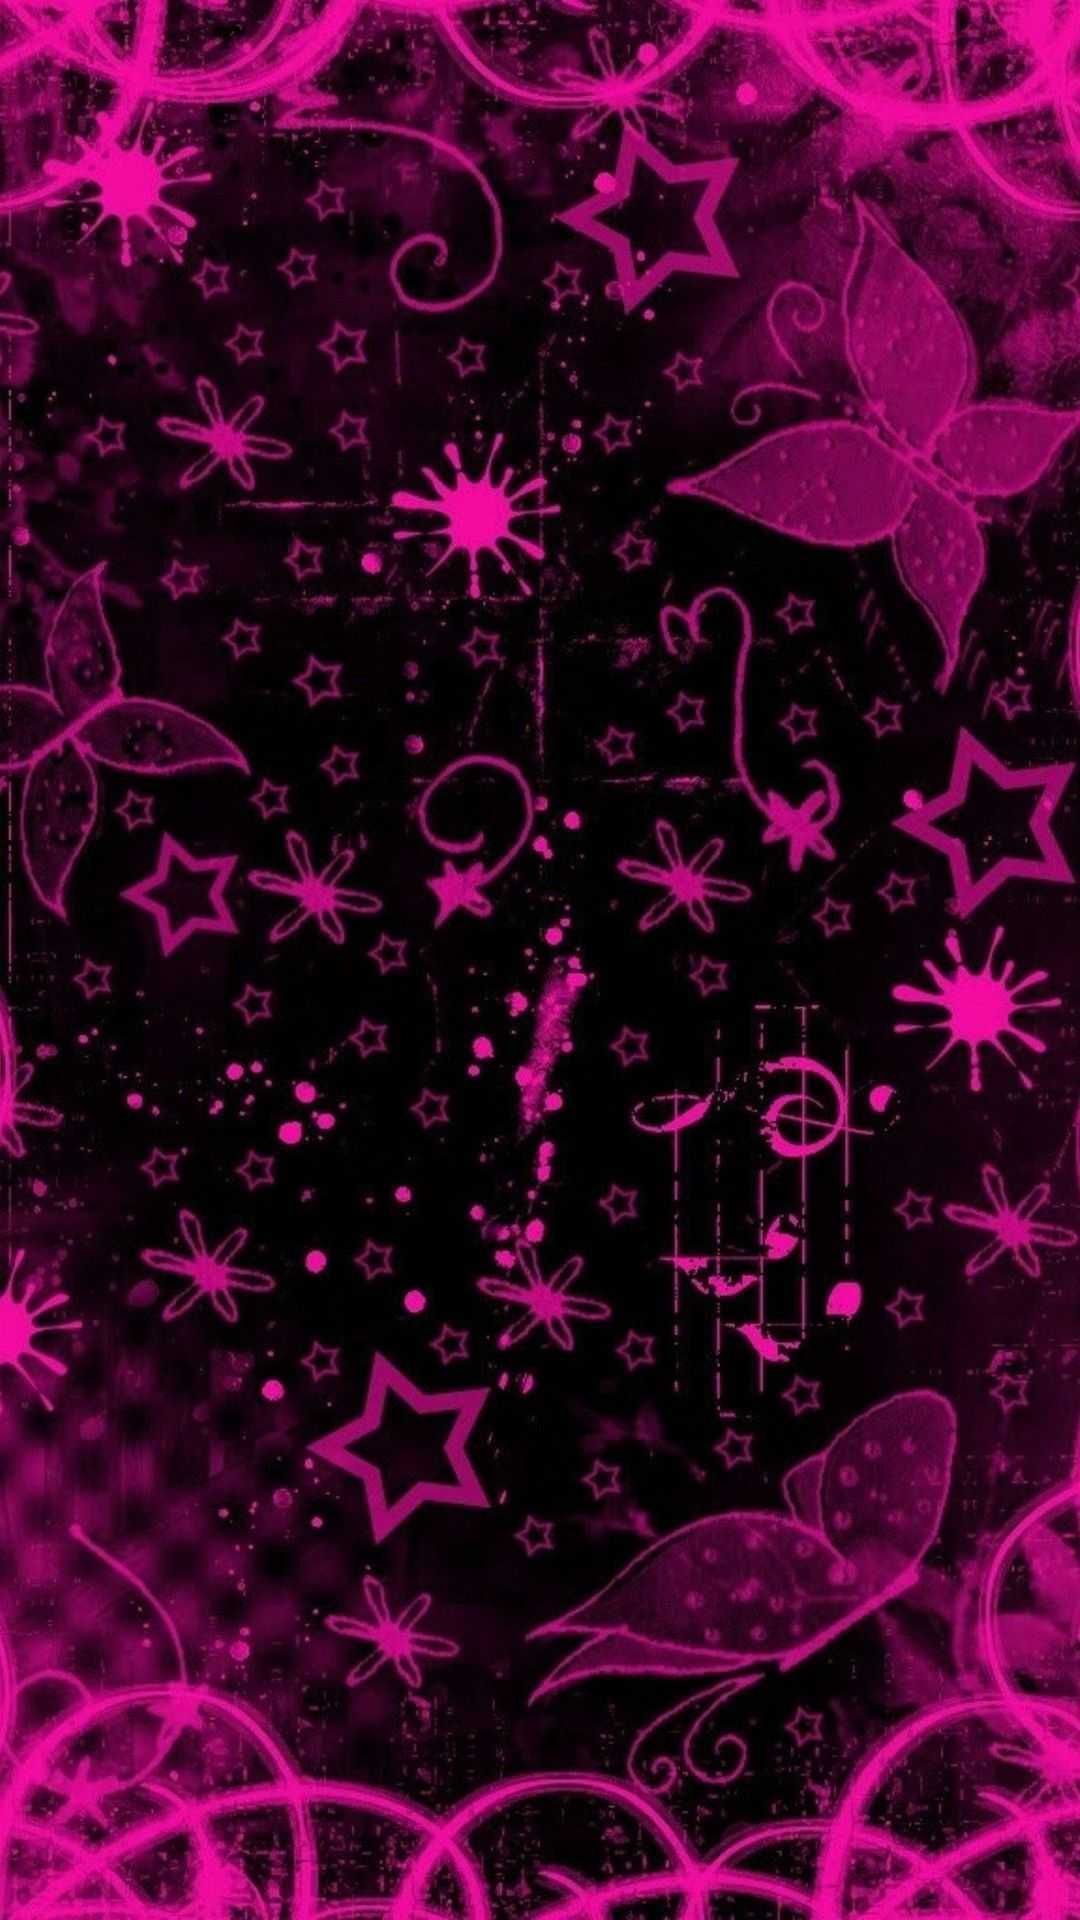 Pink and black background with stars, hearts - Emo